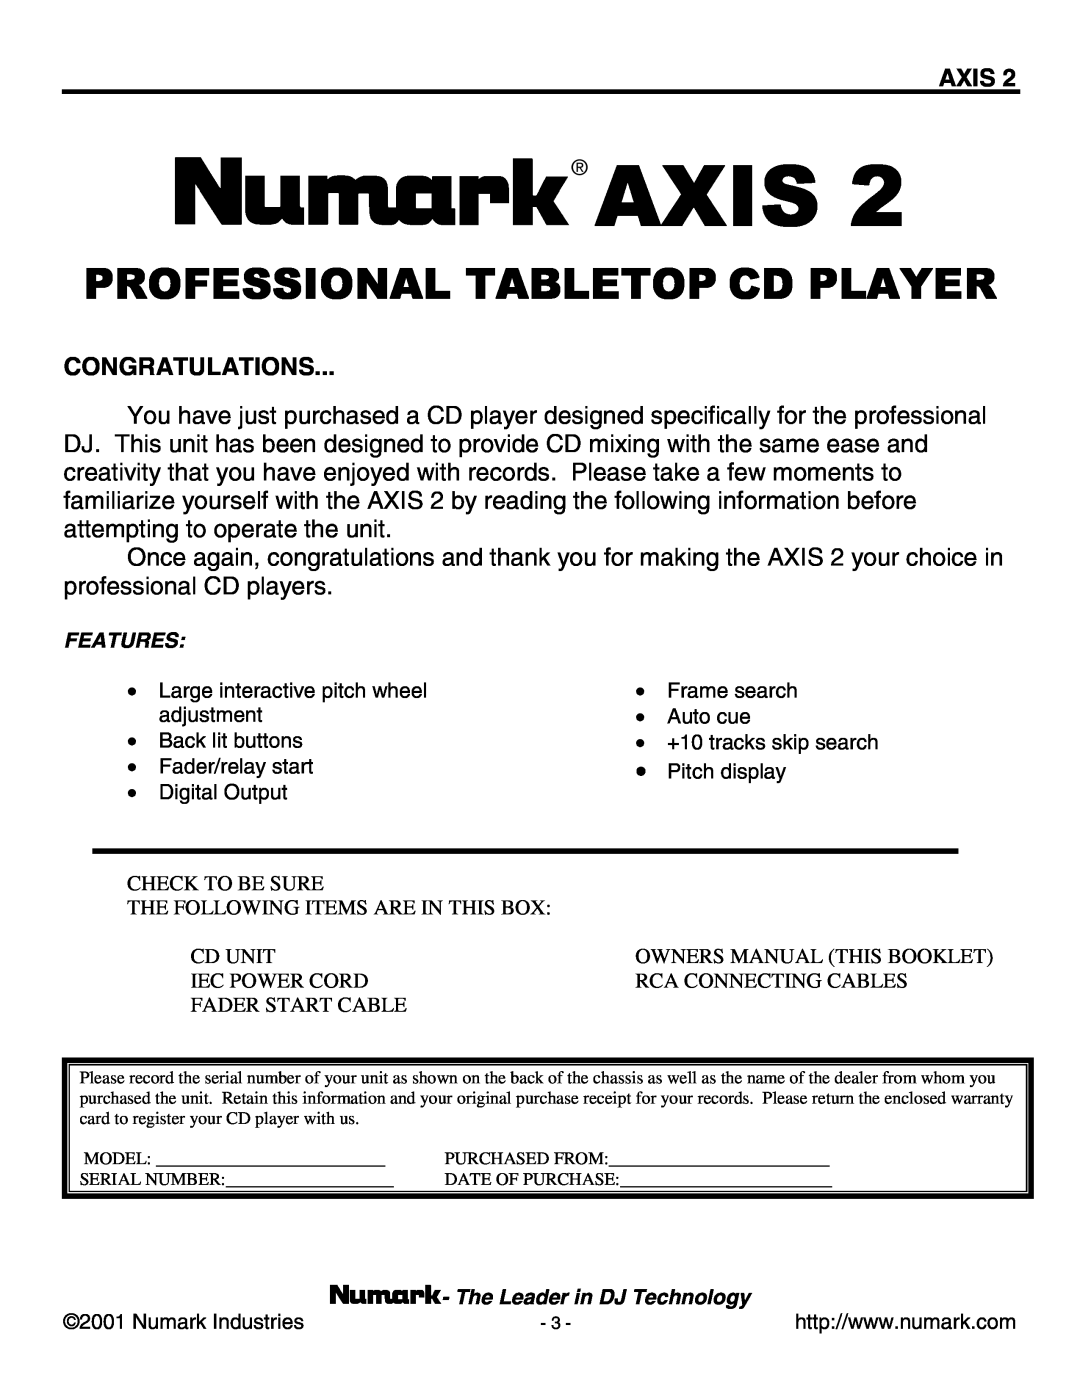 Numark Industries AXIS 9 manual Congratulations, Axis, Professional Tabletop Cd Player 